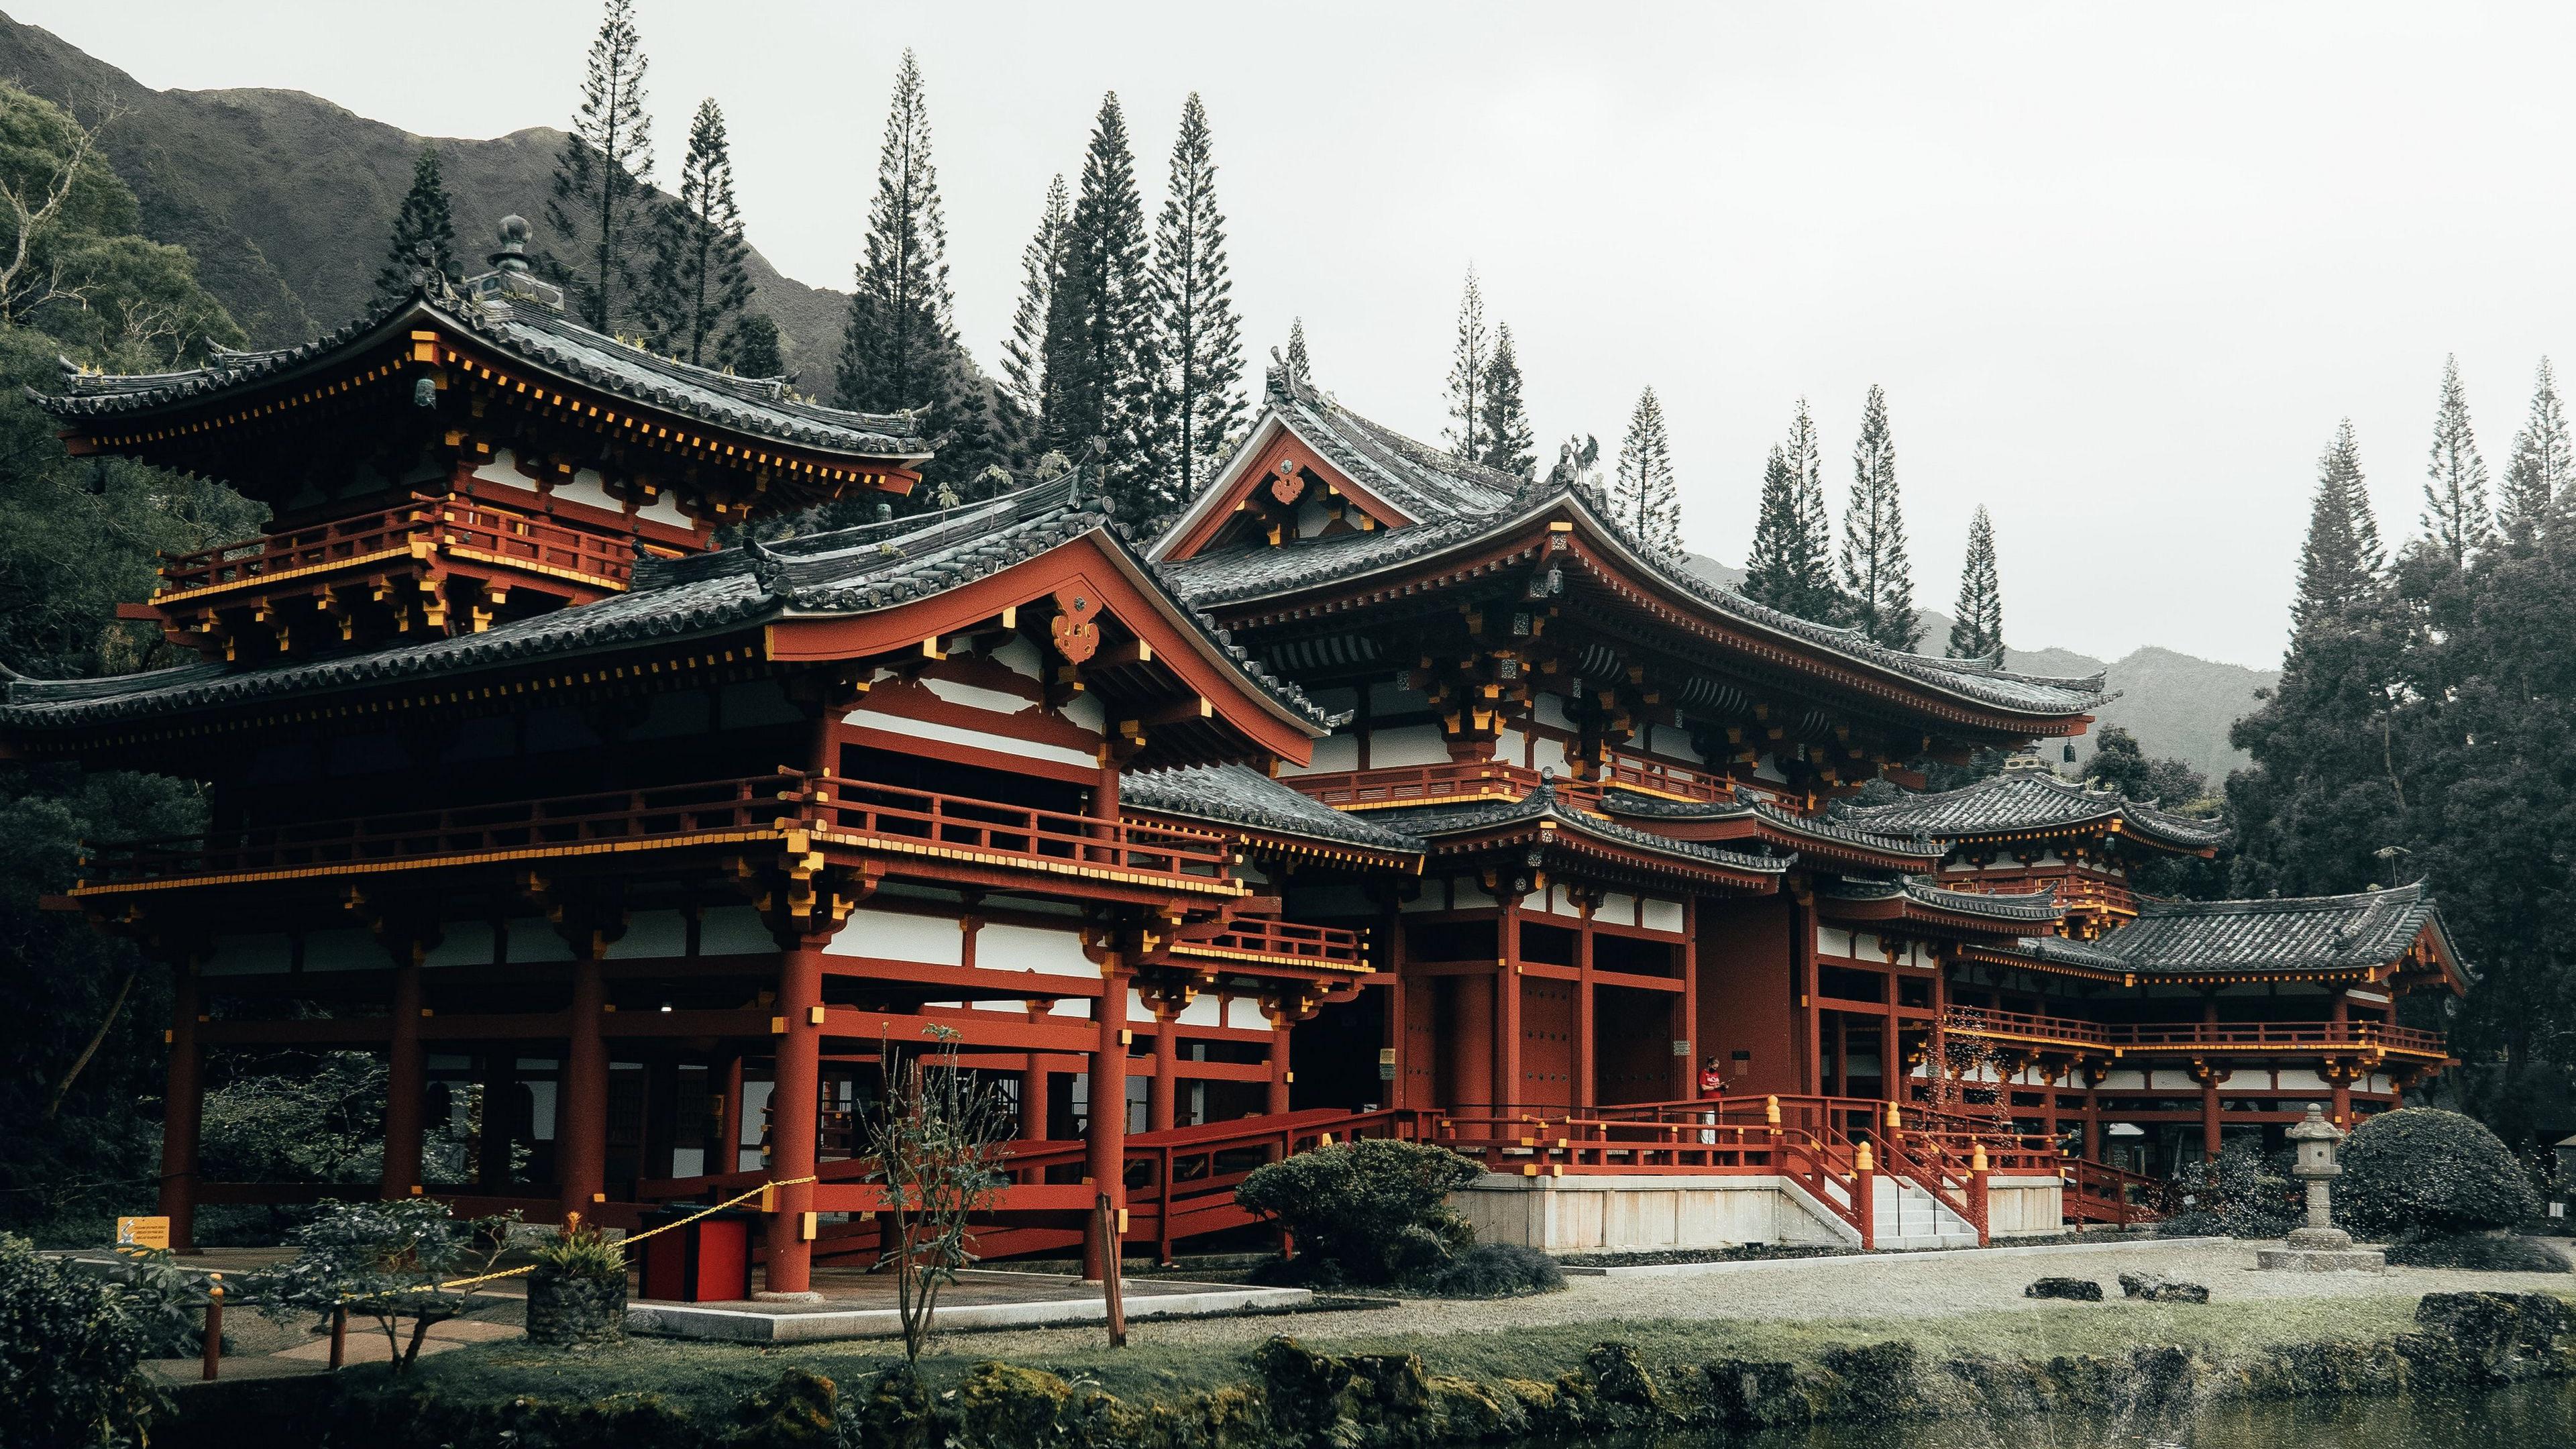 General 3840x2160 house building architecture The Byodo-In Temple Hawaii Asian architecture